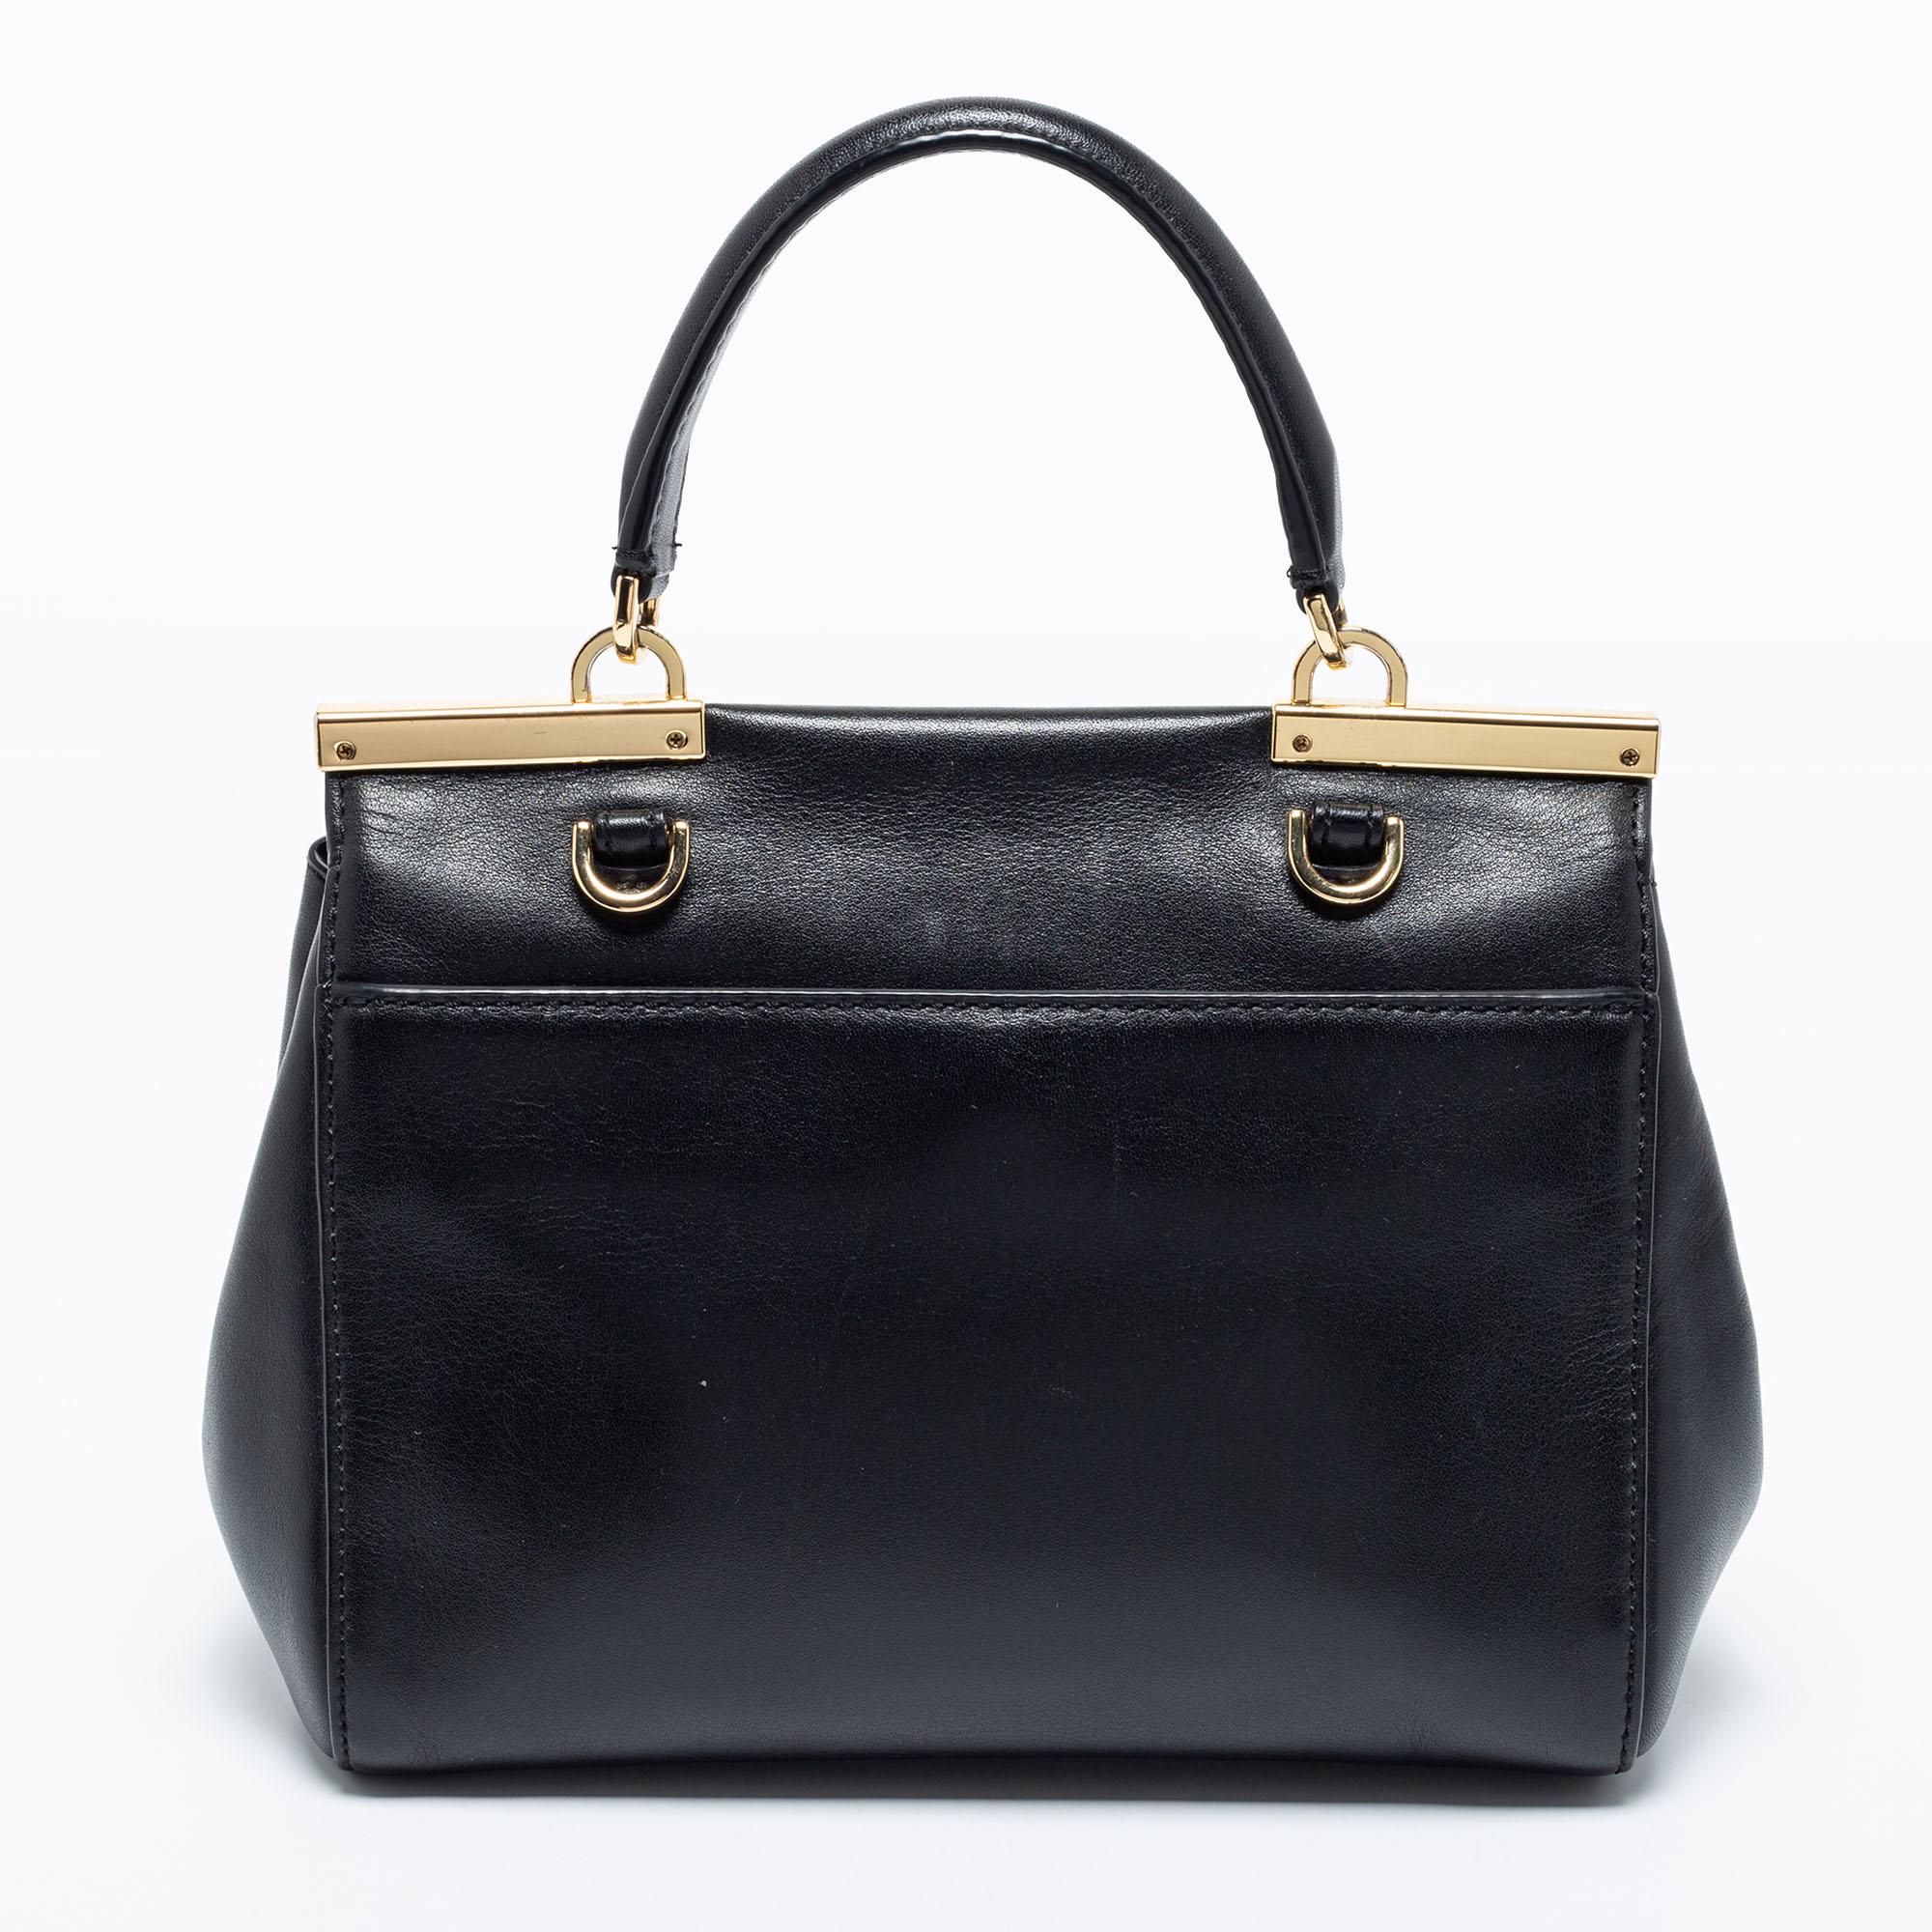 Know for their exquisite craftsmanship and timeless designs, Michael Kors bags are a must-have. This Marlow bag is made from black leather, which is embellished with gold-tone hardware. It showcases a top handle and a fabric-lined interior. This bag